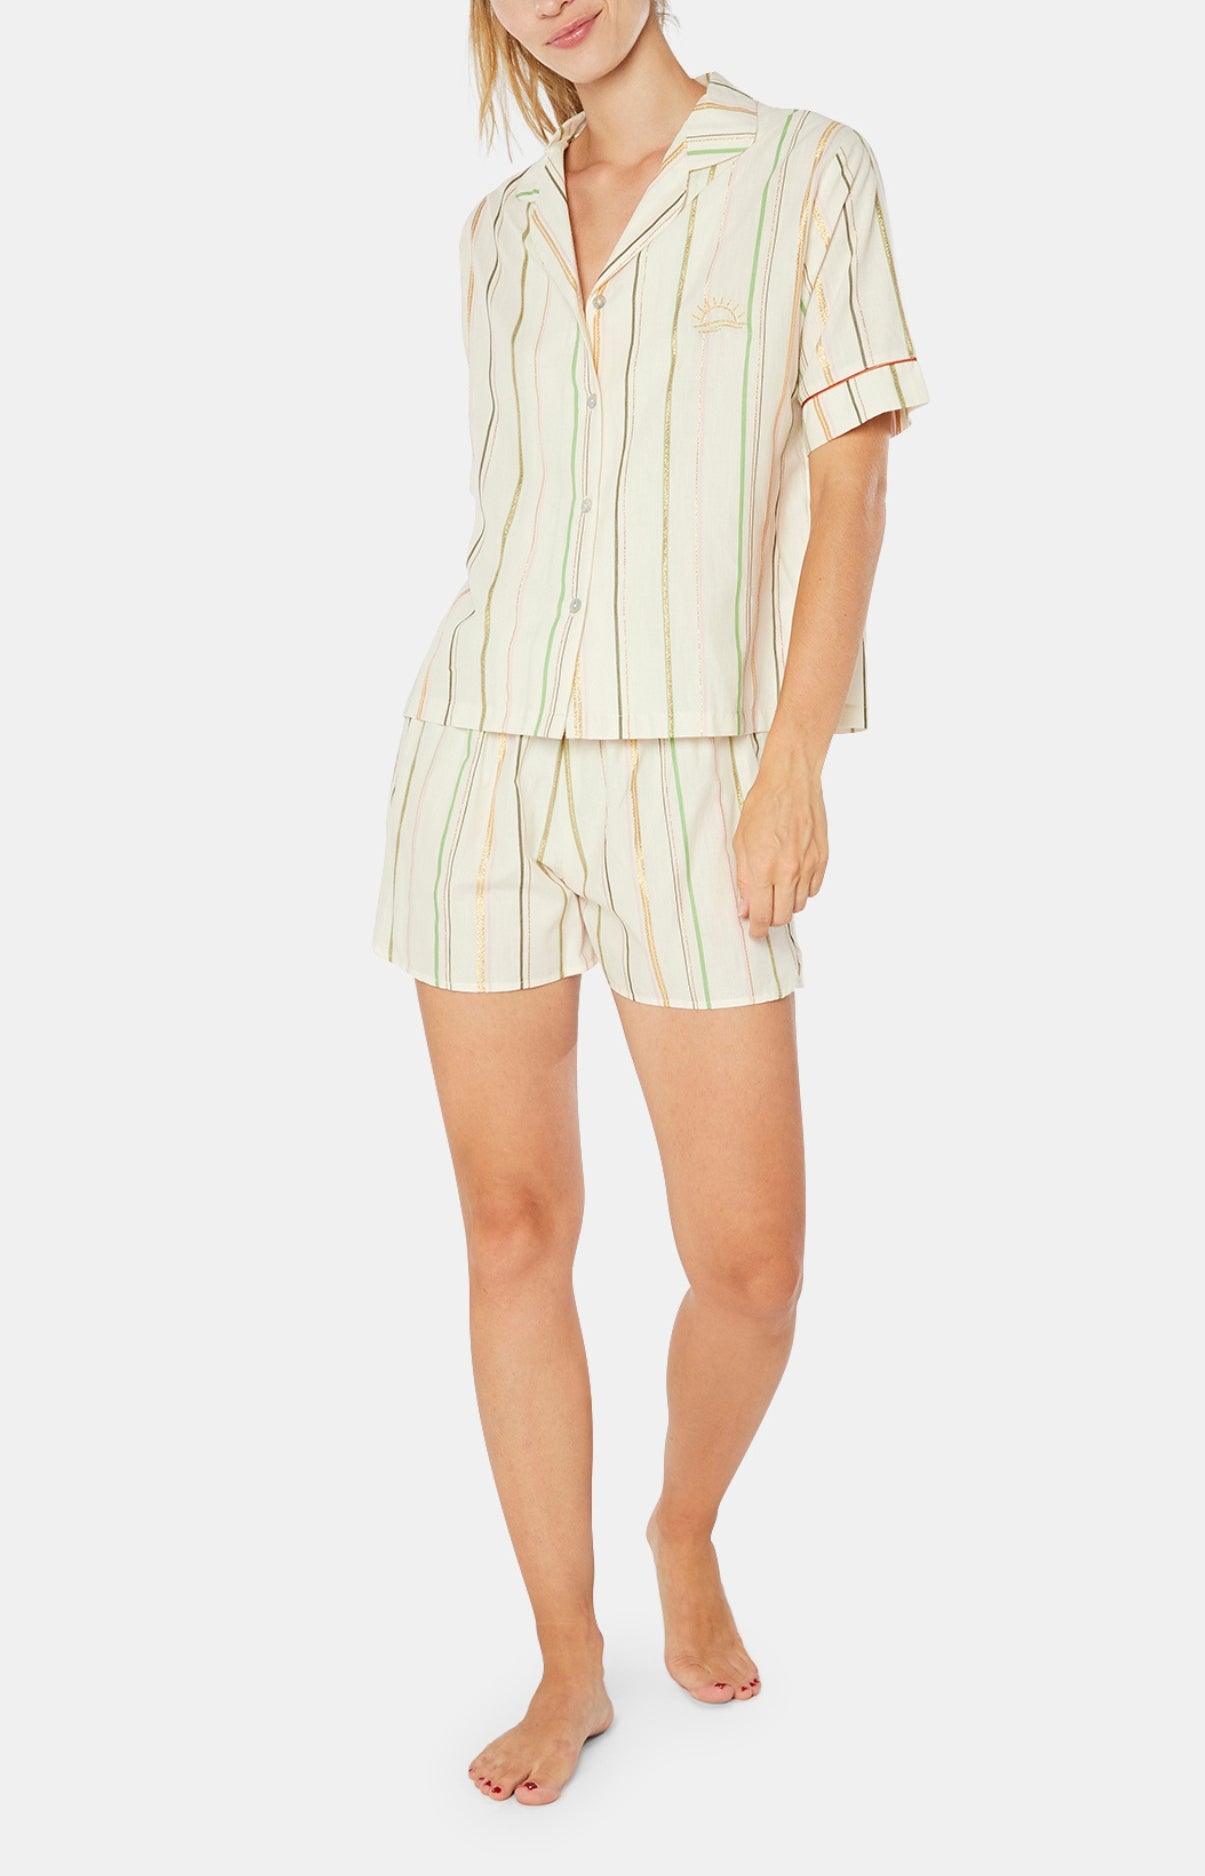 Sunset Summer Outfit - Striped